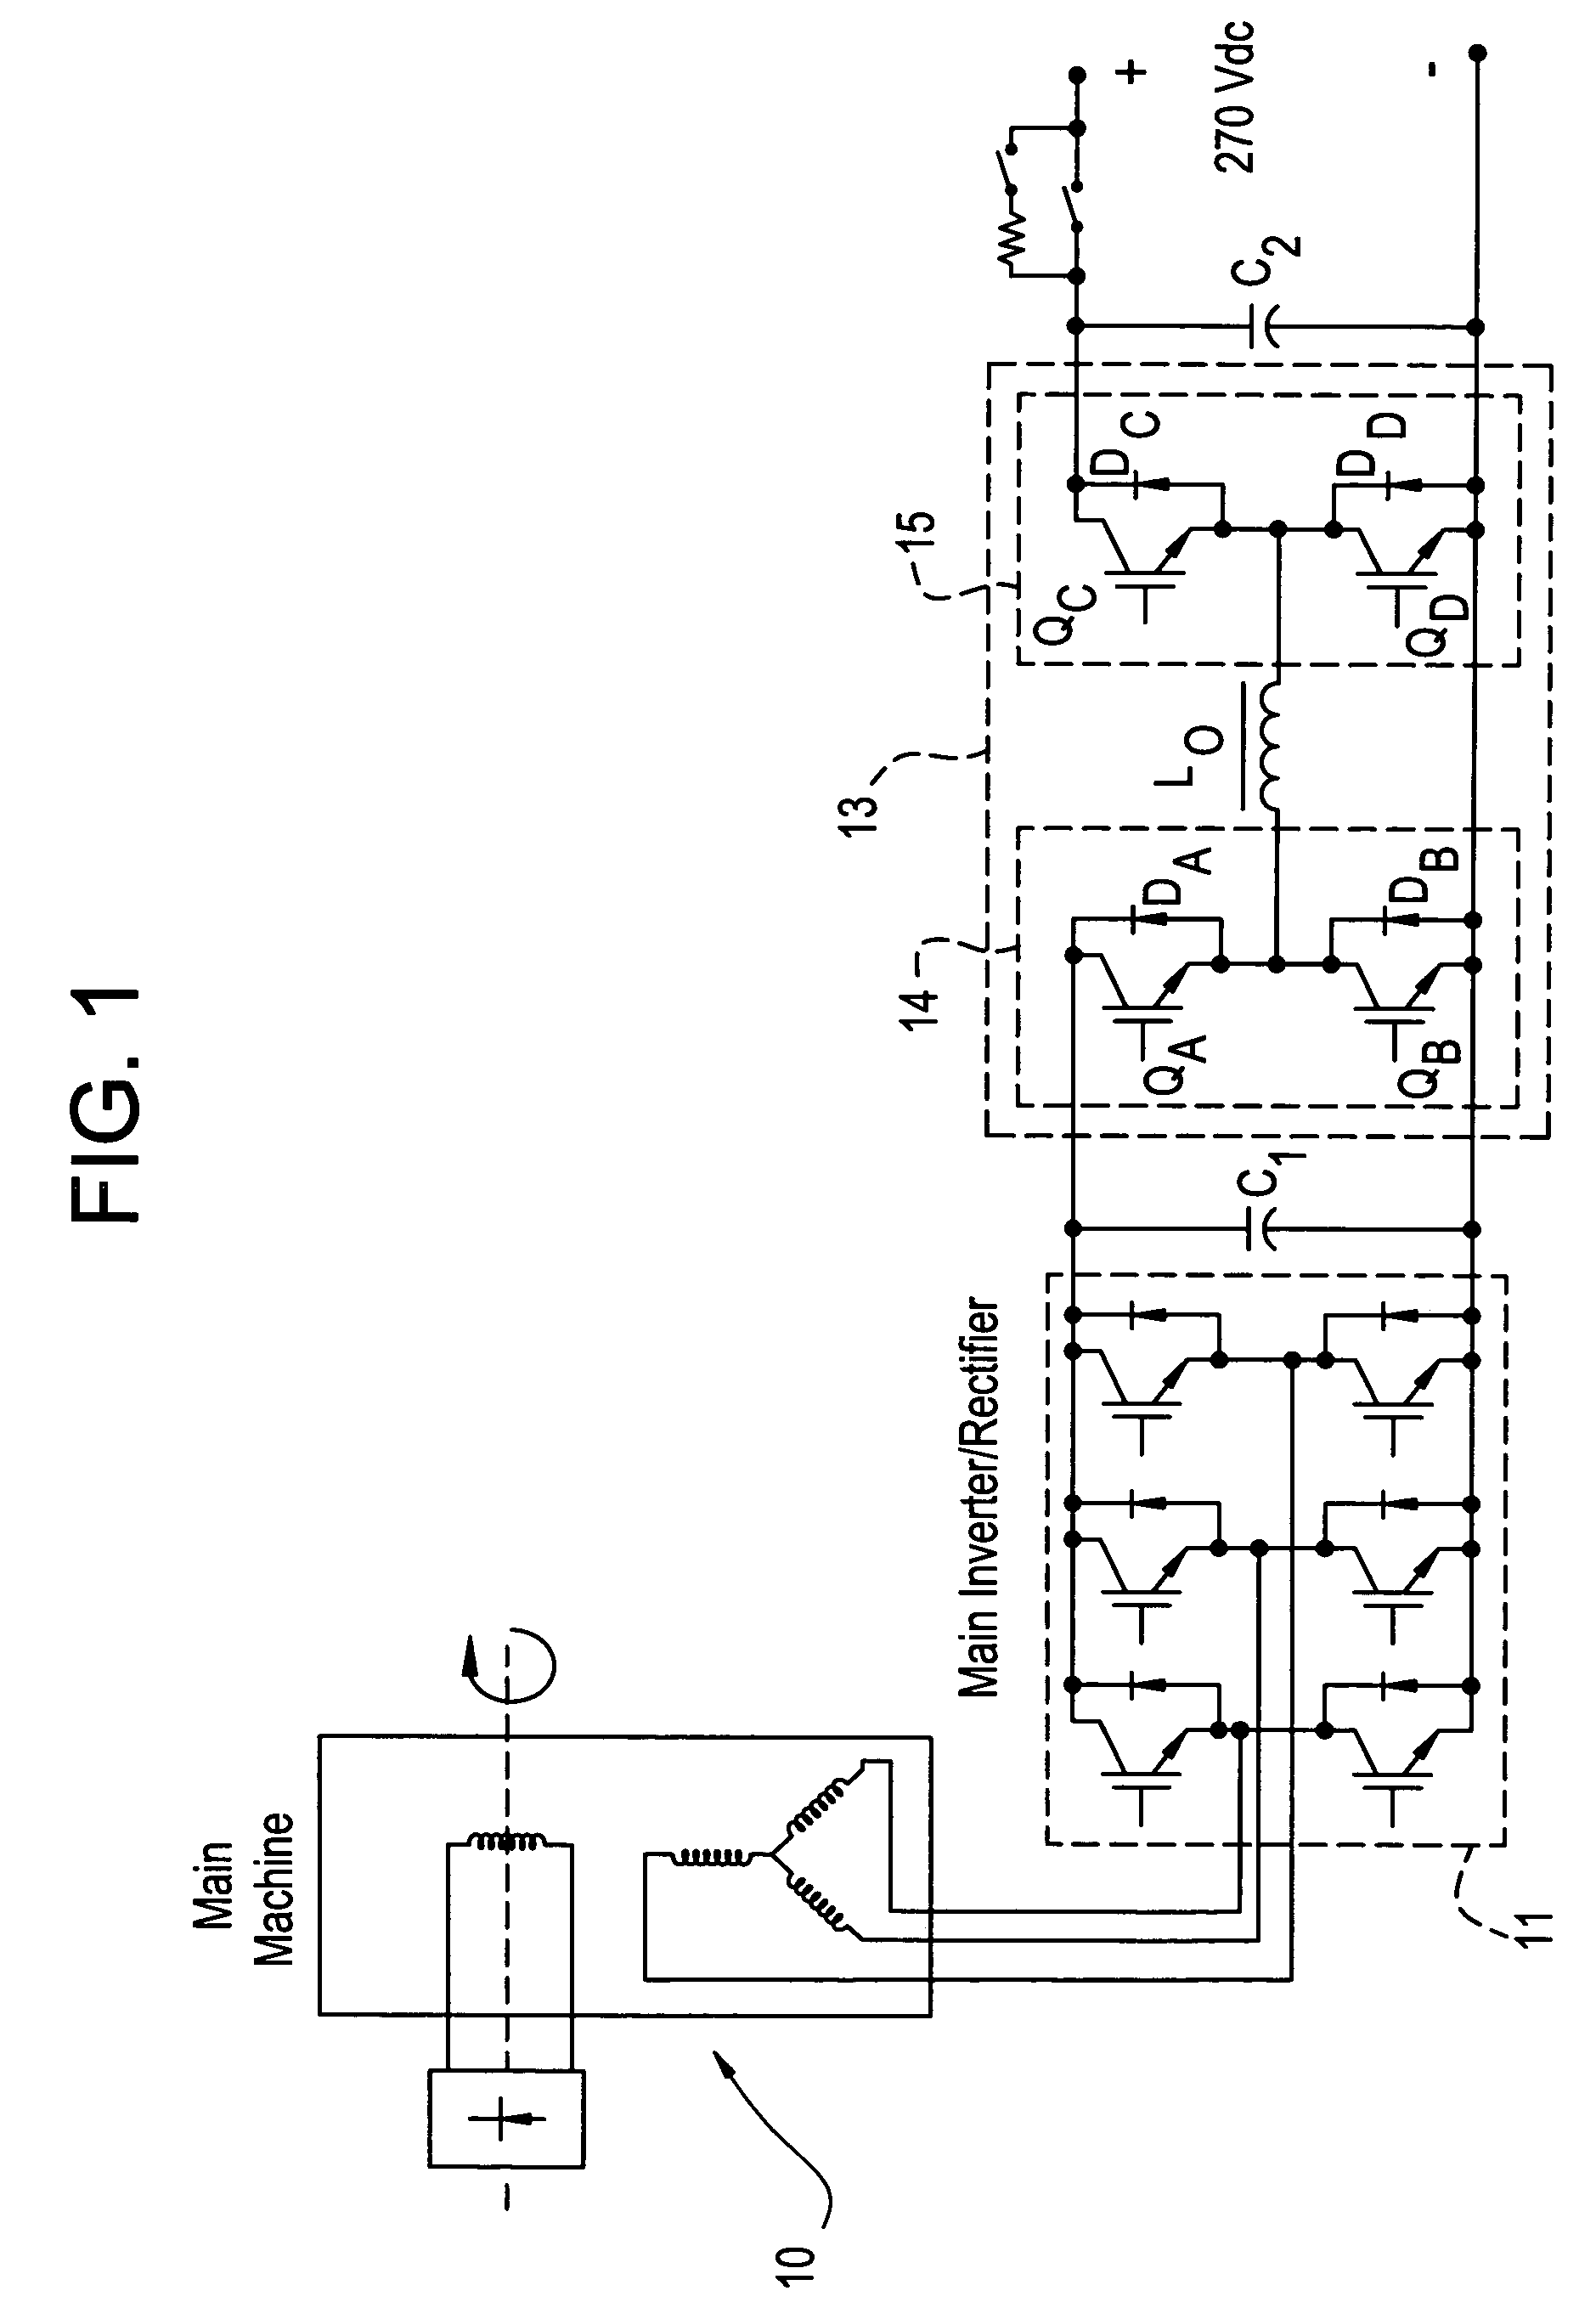 Electric starter generator system employing bidirectional buck-boost power converters, and methods therefor